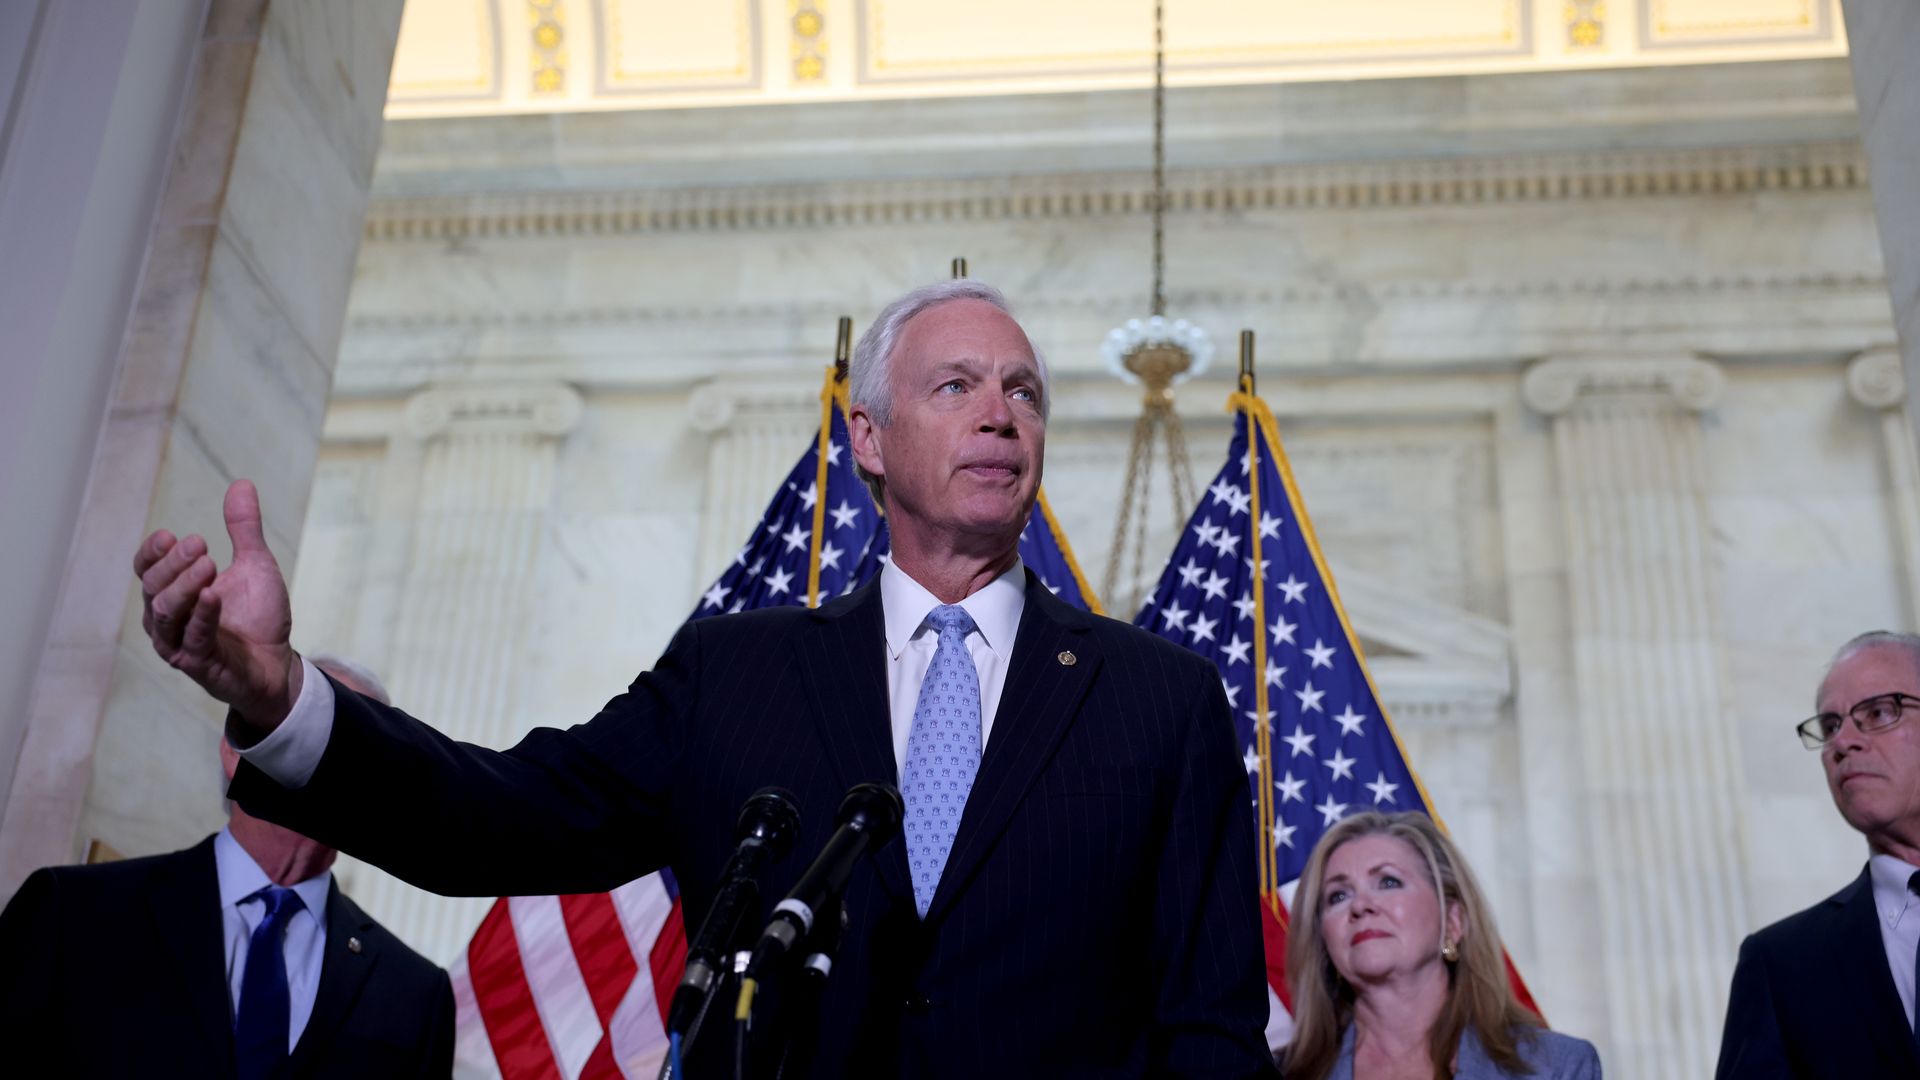 Sen. Ron Johnson (R-Wis.) speaking during a press conference on June 10.